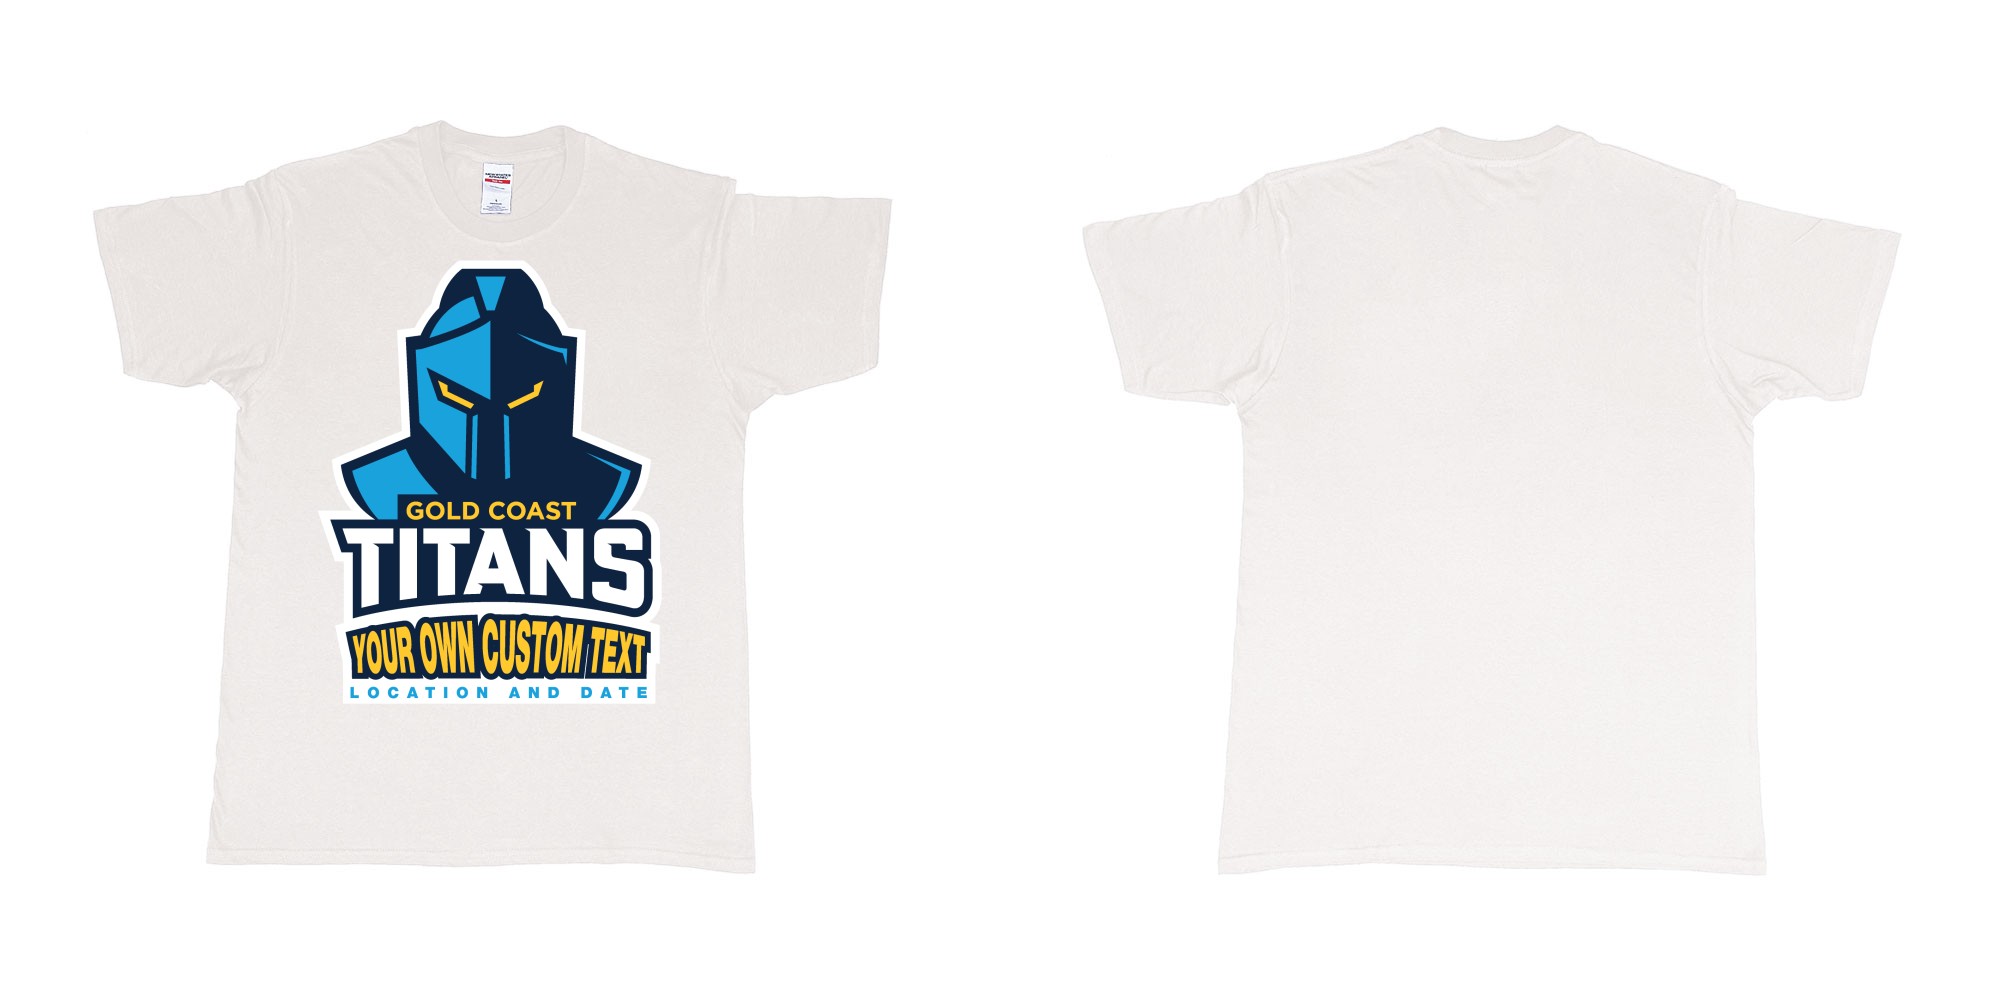 Custom tshirt design gold coast titans own custom design print in fabric color white choice your own text made in Bali by The Pirate Way